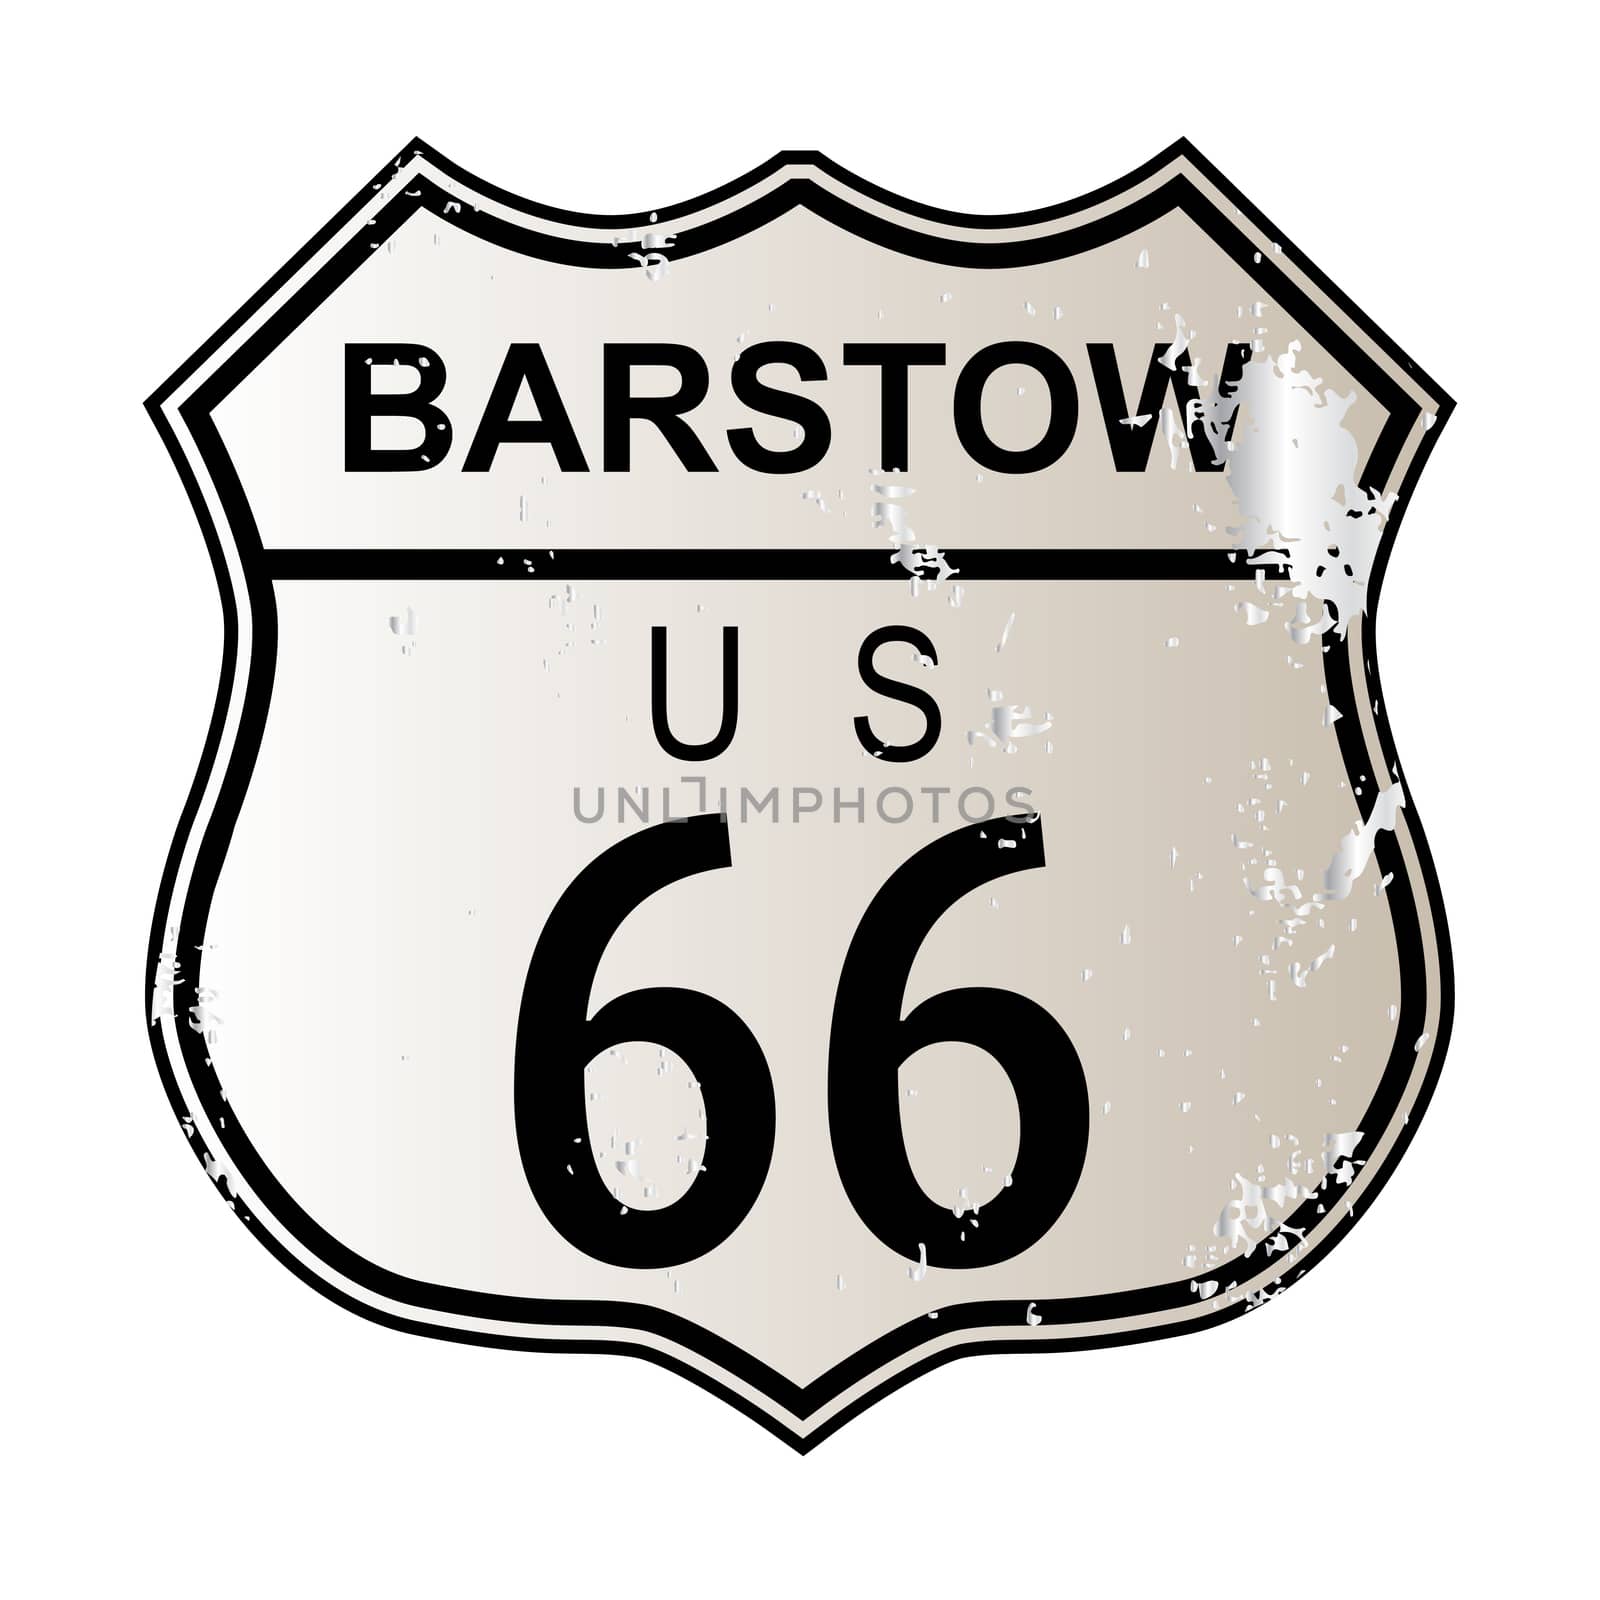 Barstow Route 66 by Bigalbaloo